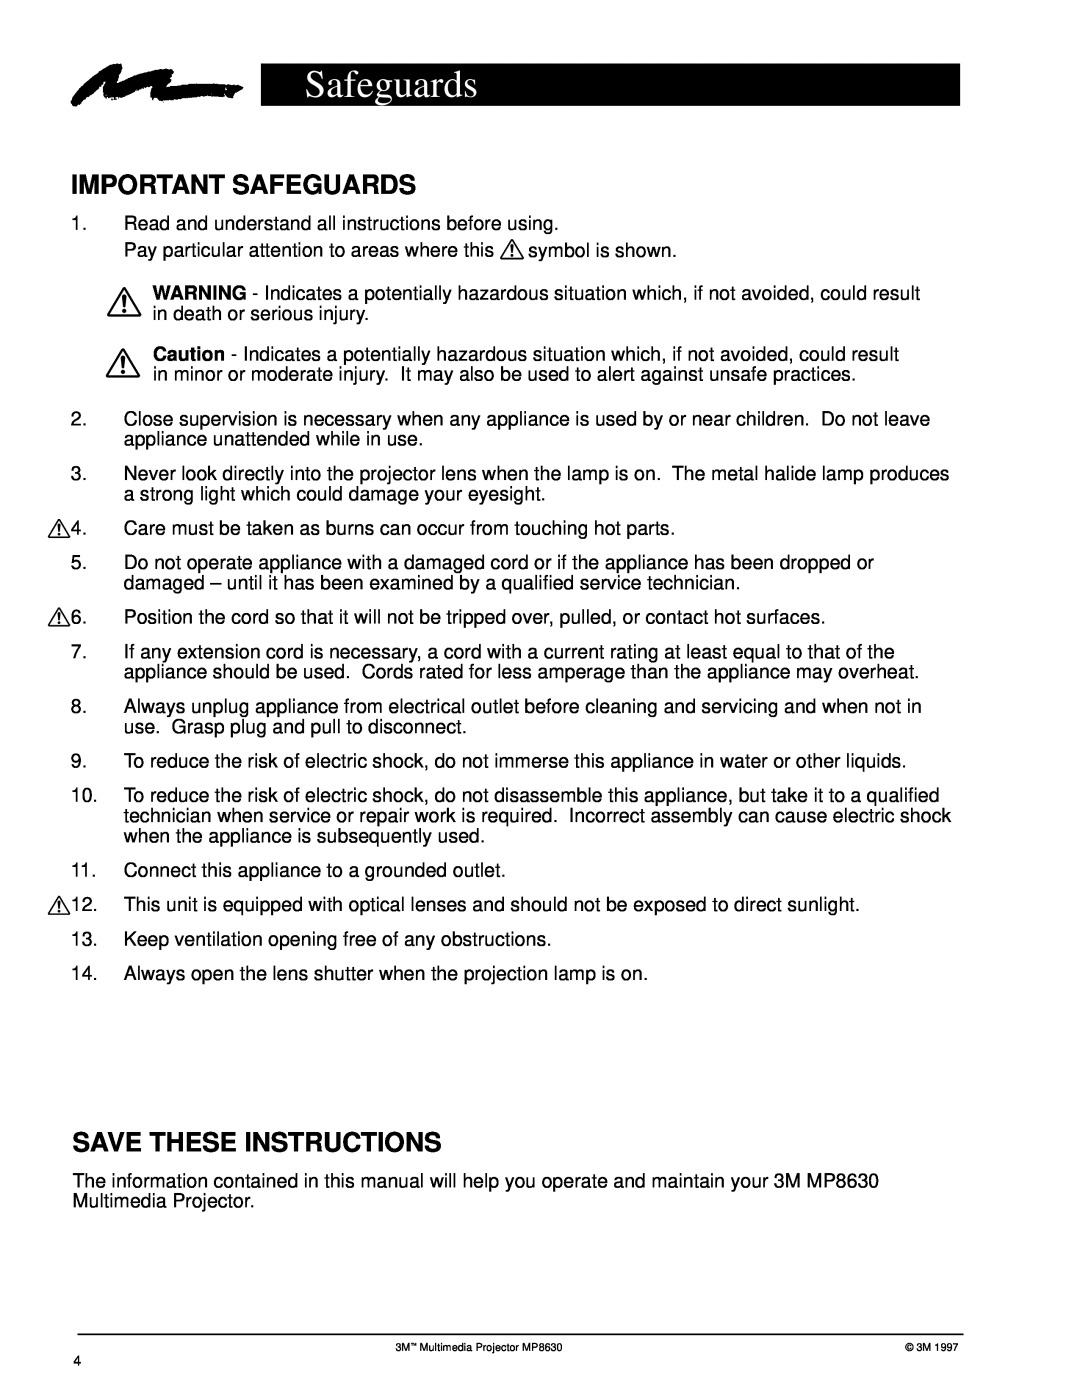 3M MP8630 manual Important Safeguards, Save These Instructions 